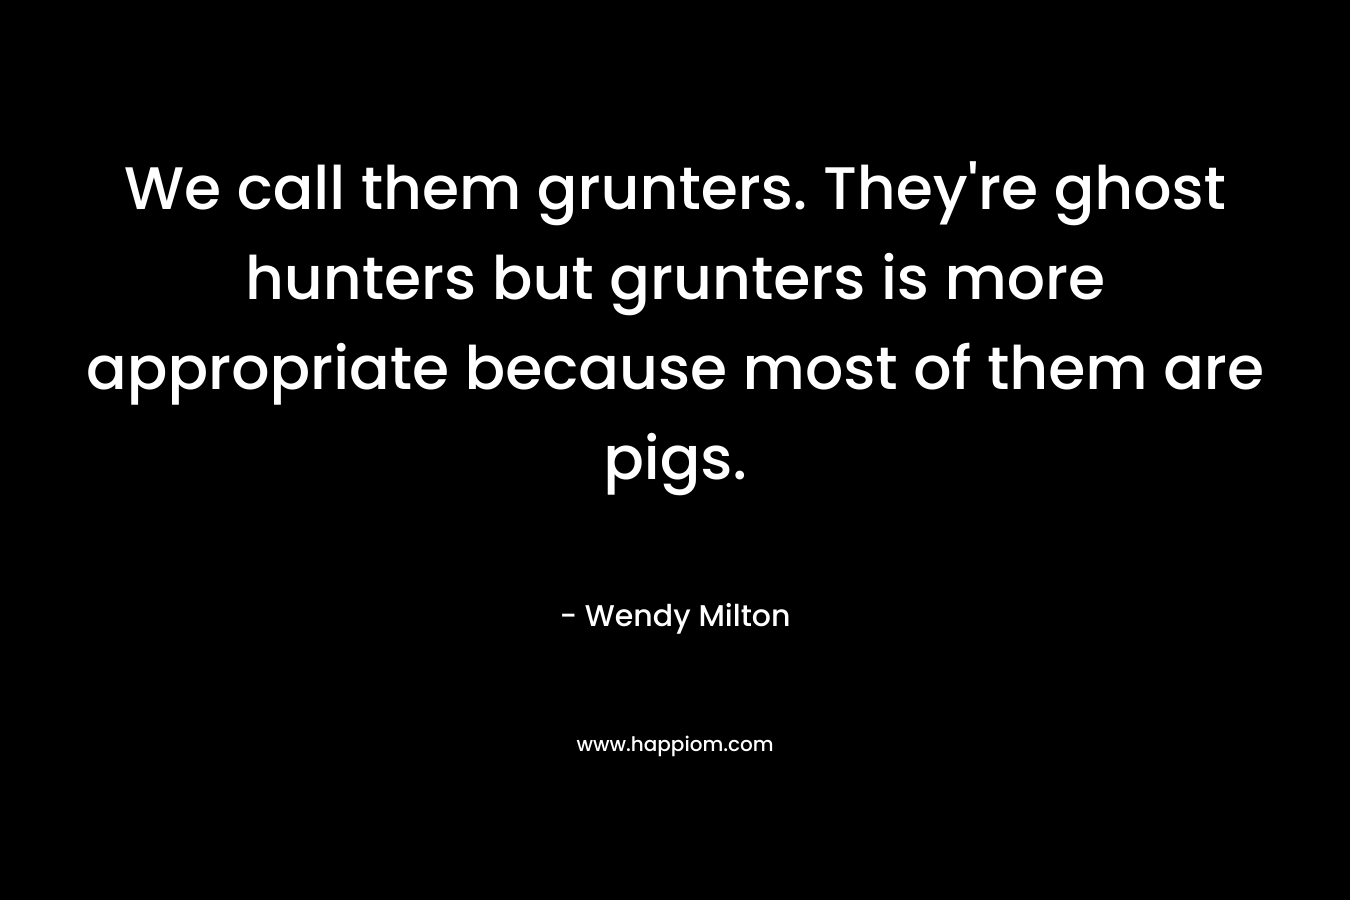 We call them grunters. They’re ghost hunters but grunters is more appropriate because most of them are pigs. – Wendy Milton